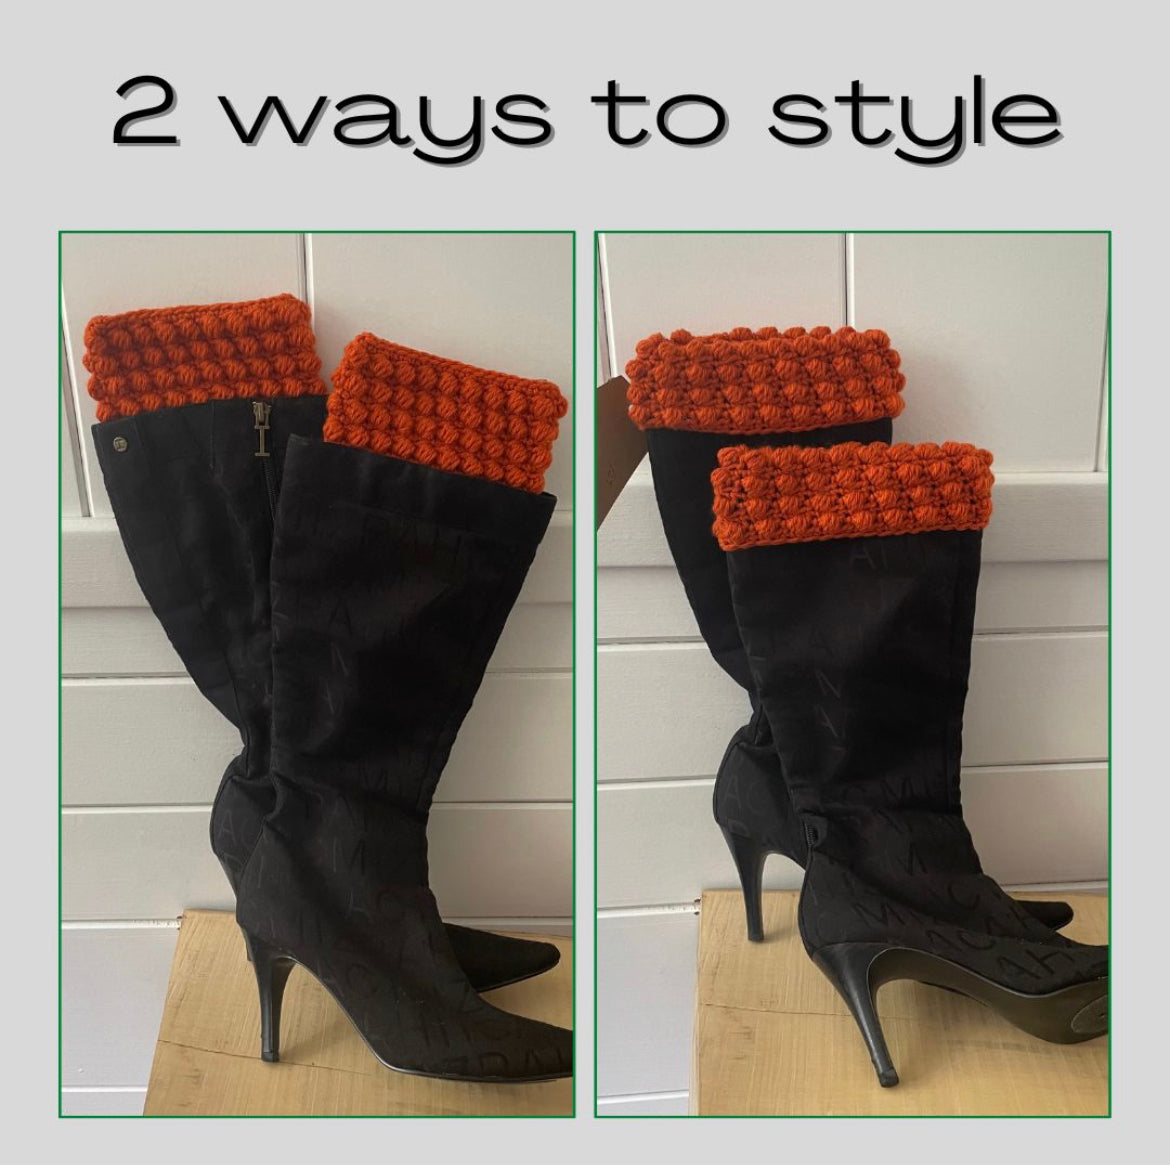 Boot Cuffs in Rusty Salmon Puff Stitch 11.5" Hand Crocheted Knit Fall Winter Hiking Indoor Outdoor Cozy Leg Warmers